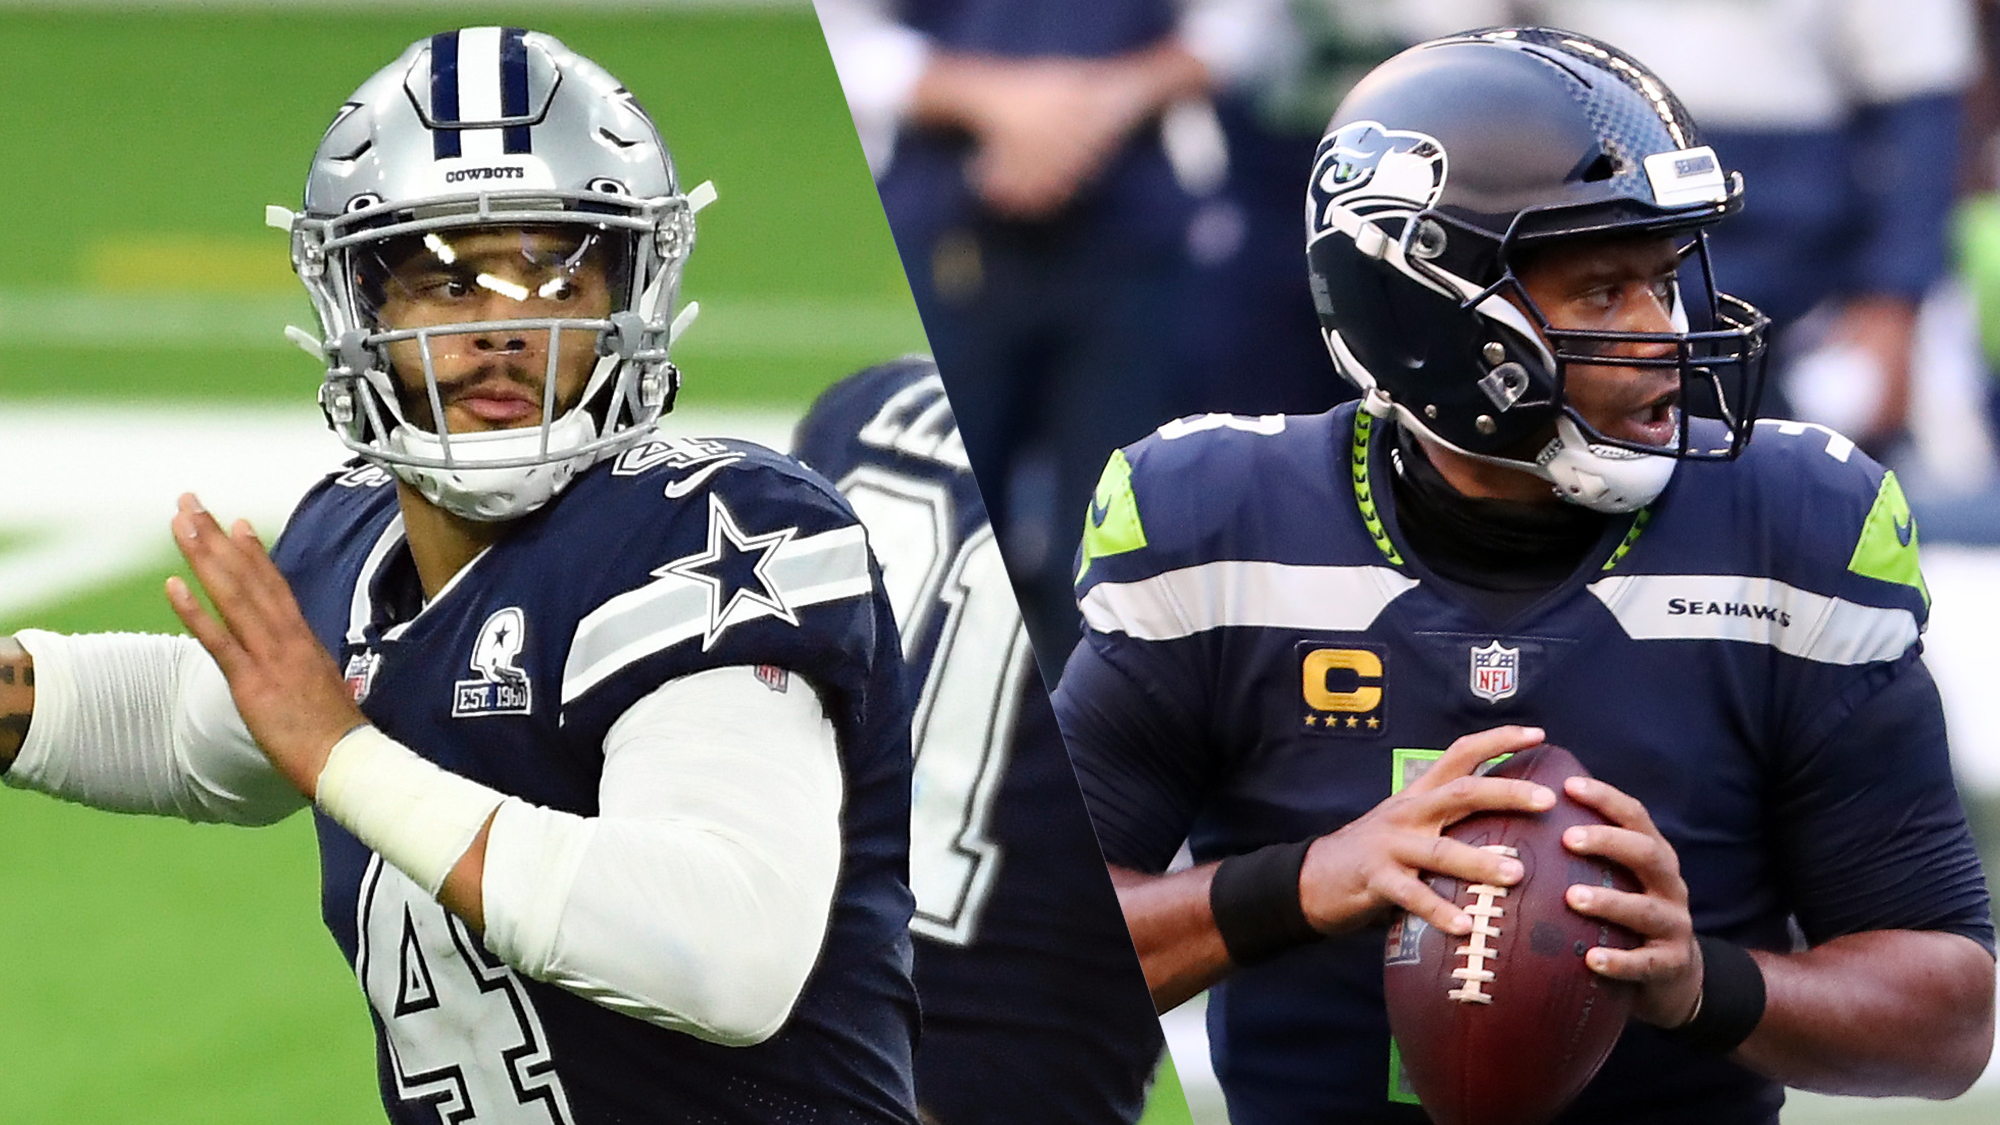 Cowboys vs Seahawks live stream: How to watch NFL week 3 game